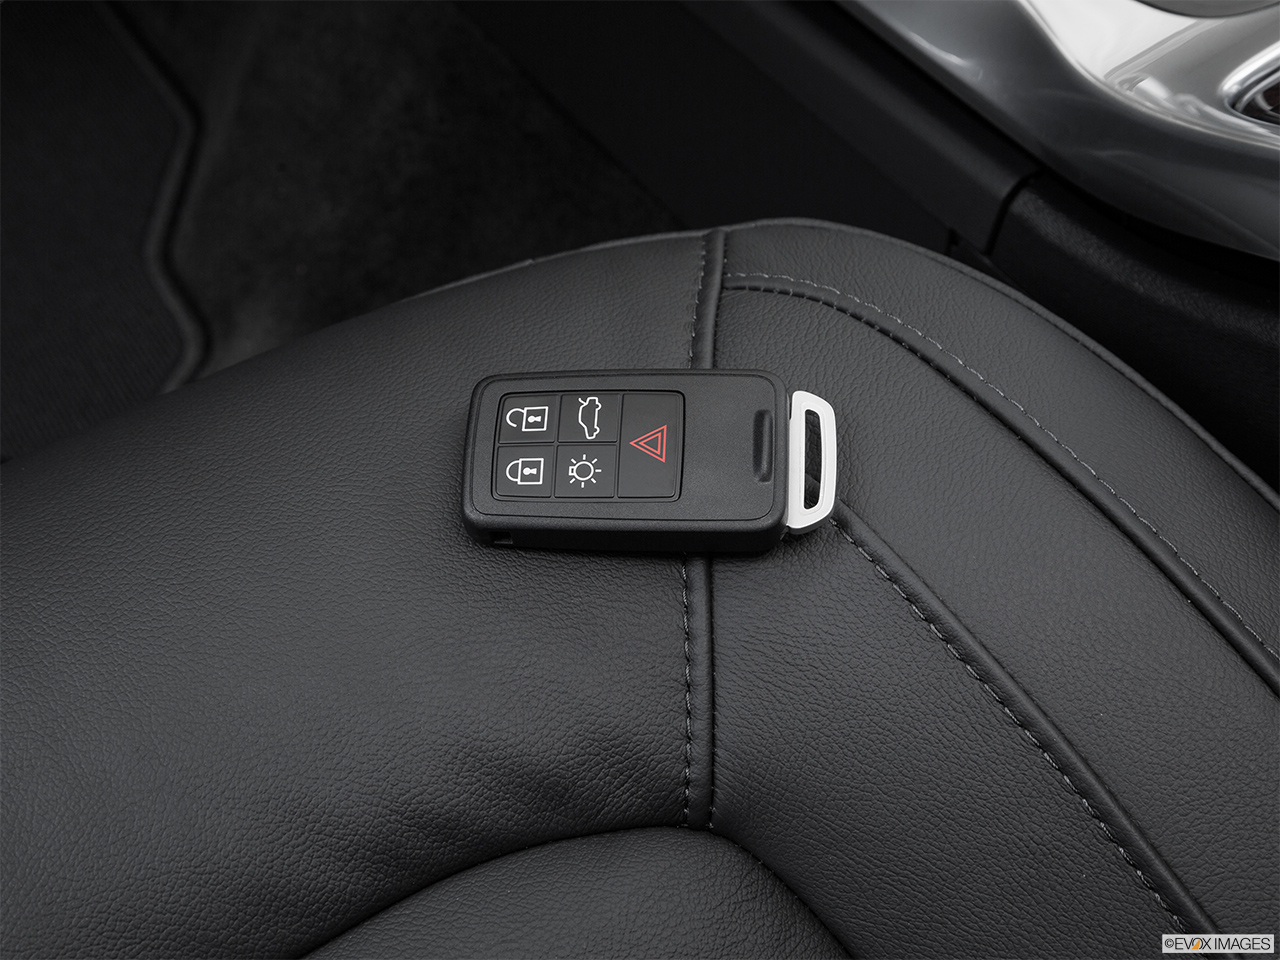 2016 Volvo S80 T5 Drive-E FWD Key fob on driver's seat. 